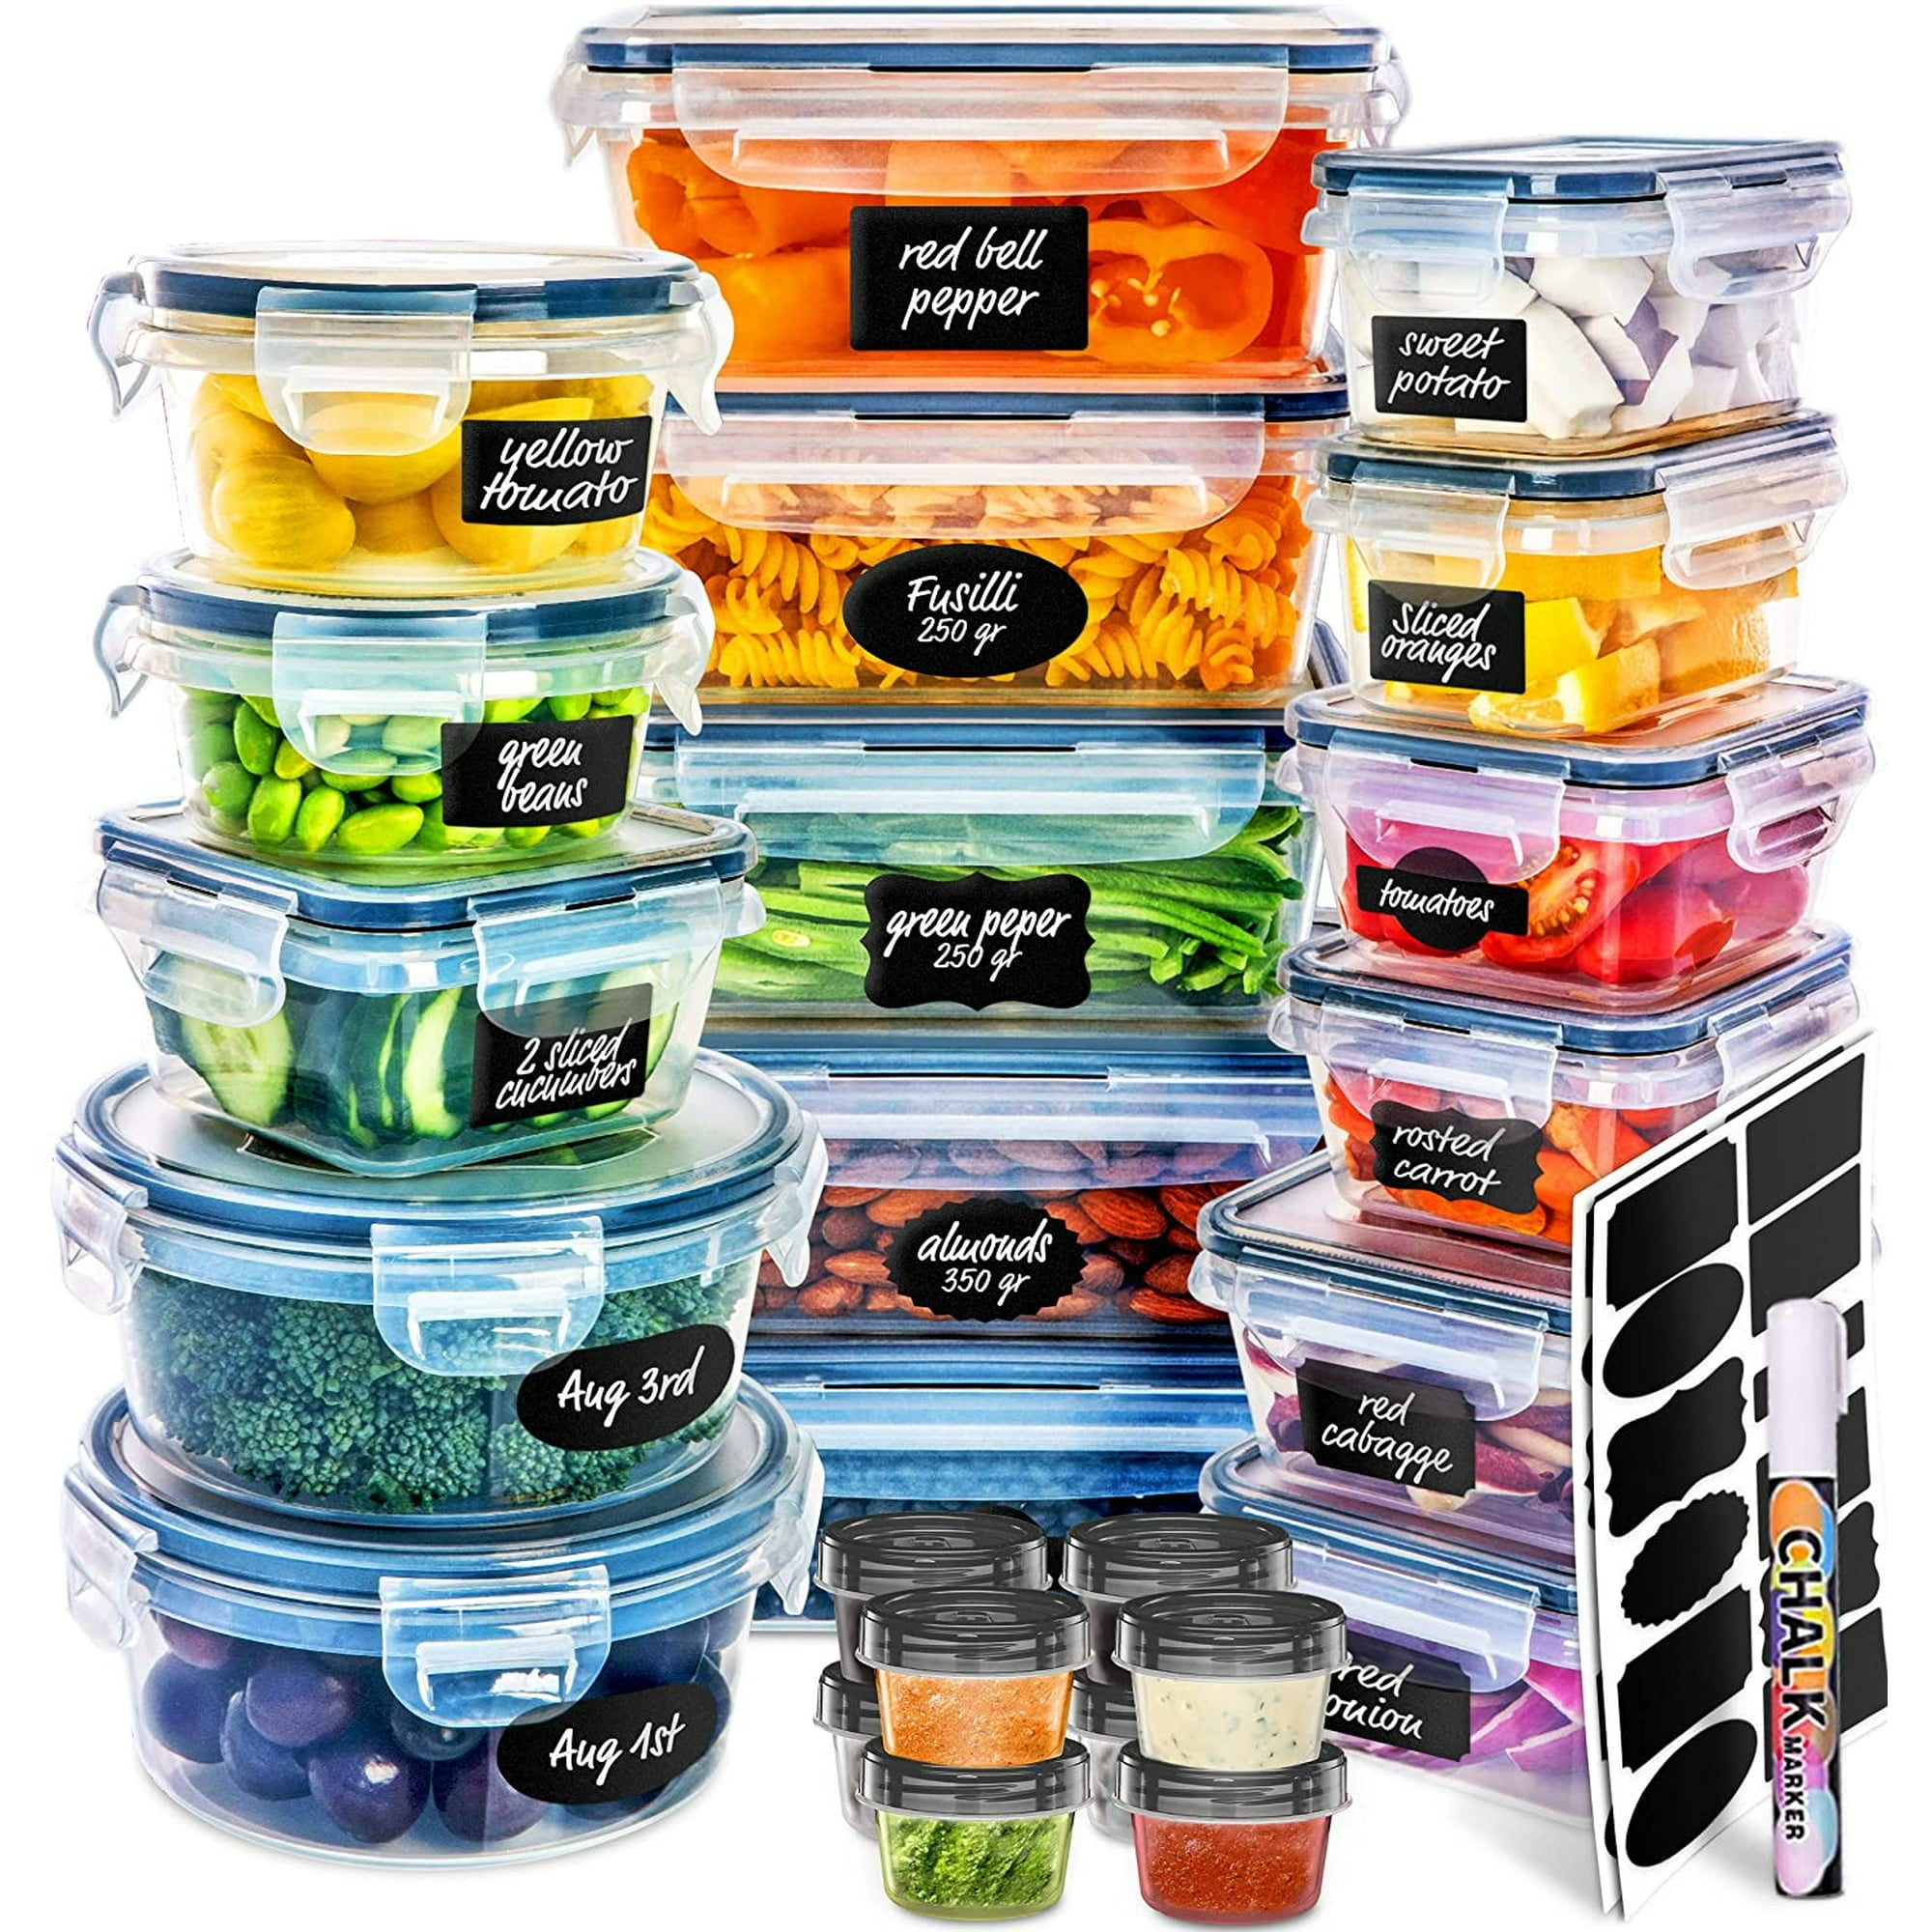 JoyJolt 24 Piece Fluted Glass Food Storage Containers with Leakproof Lids Set - Black